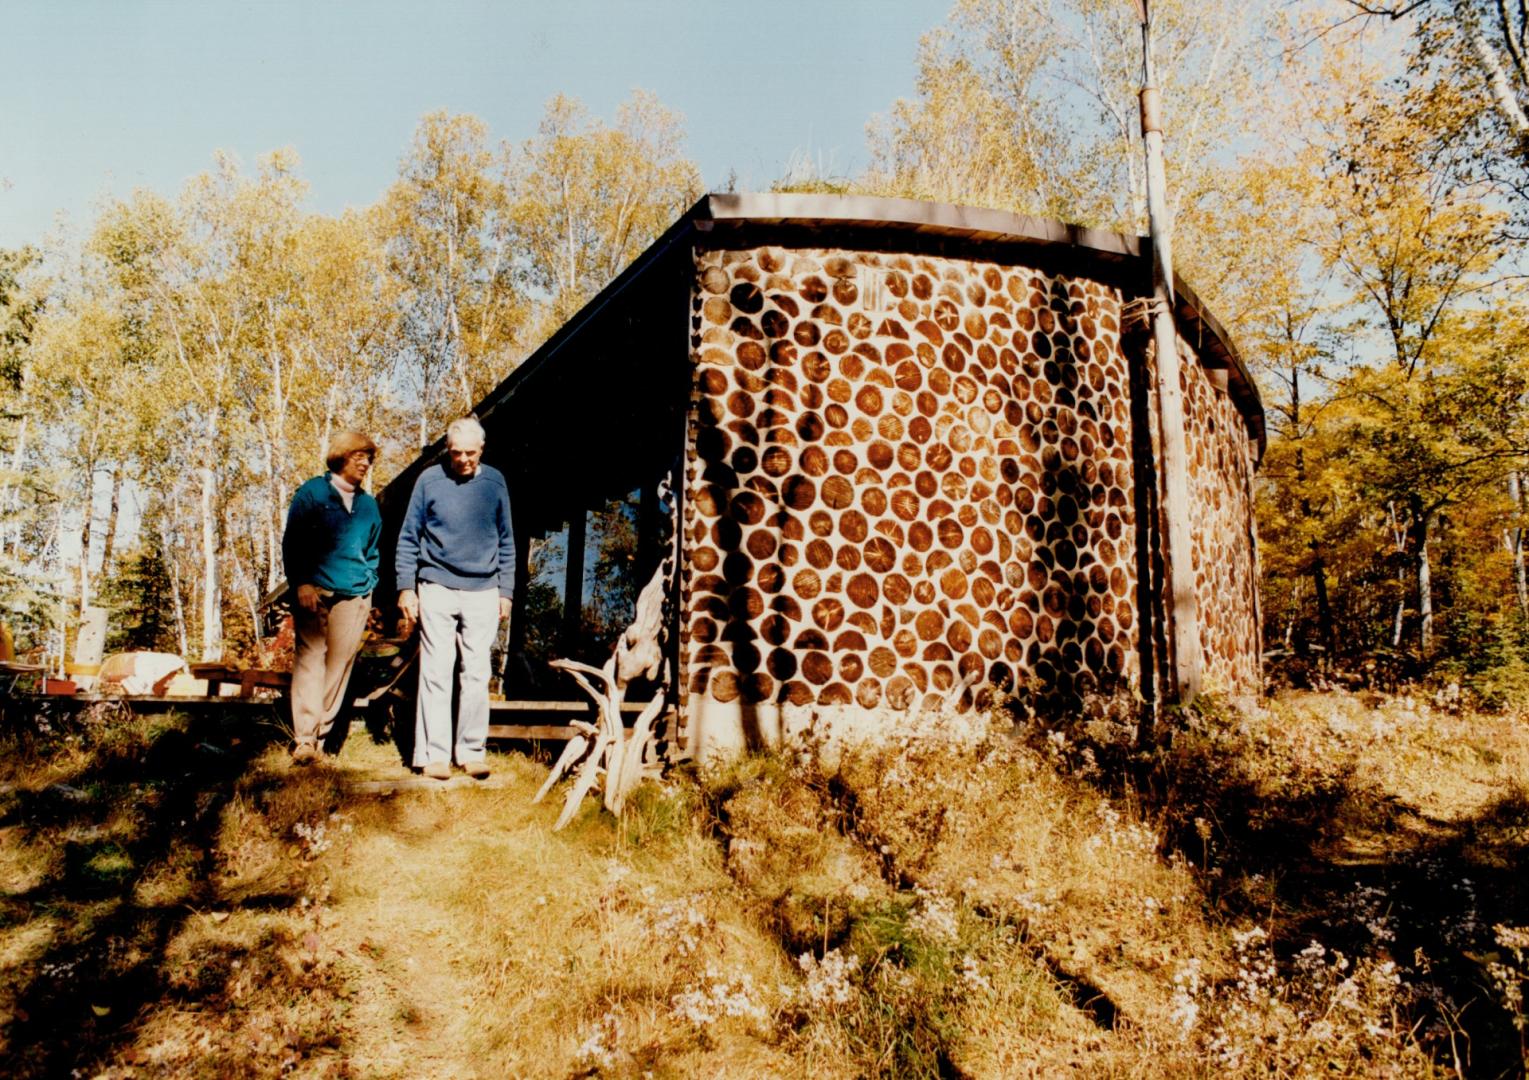 Curved space dominates the interior (above) in the innovative cottage built by local farmer Walter Madill (left) for Molly Ferguson and her late husband Bob, 25 years ago